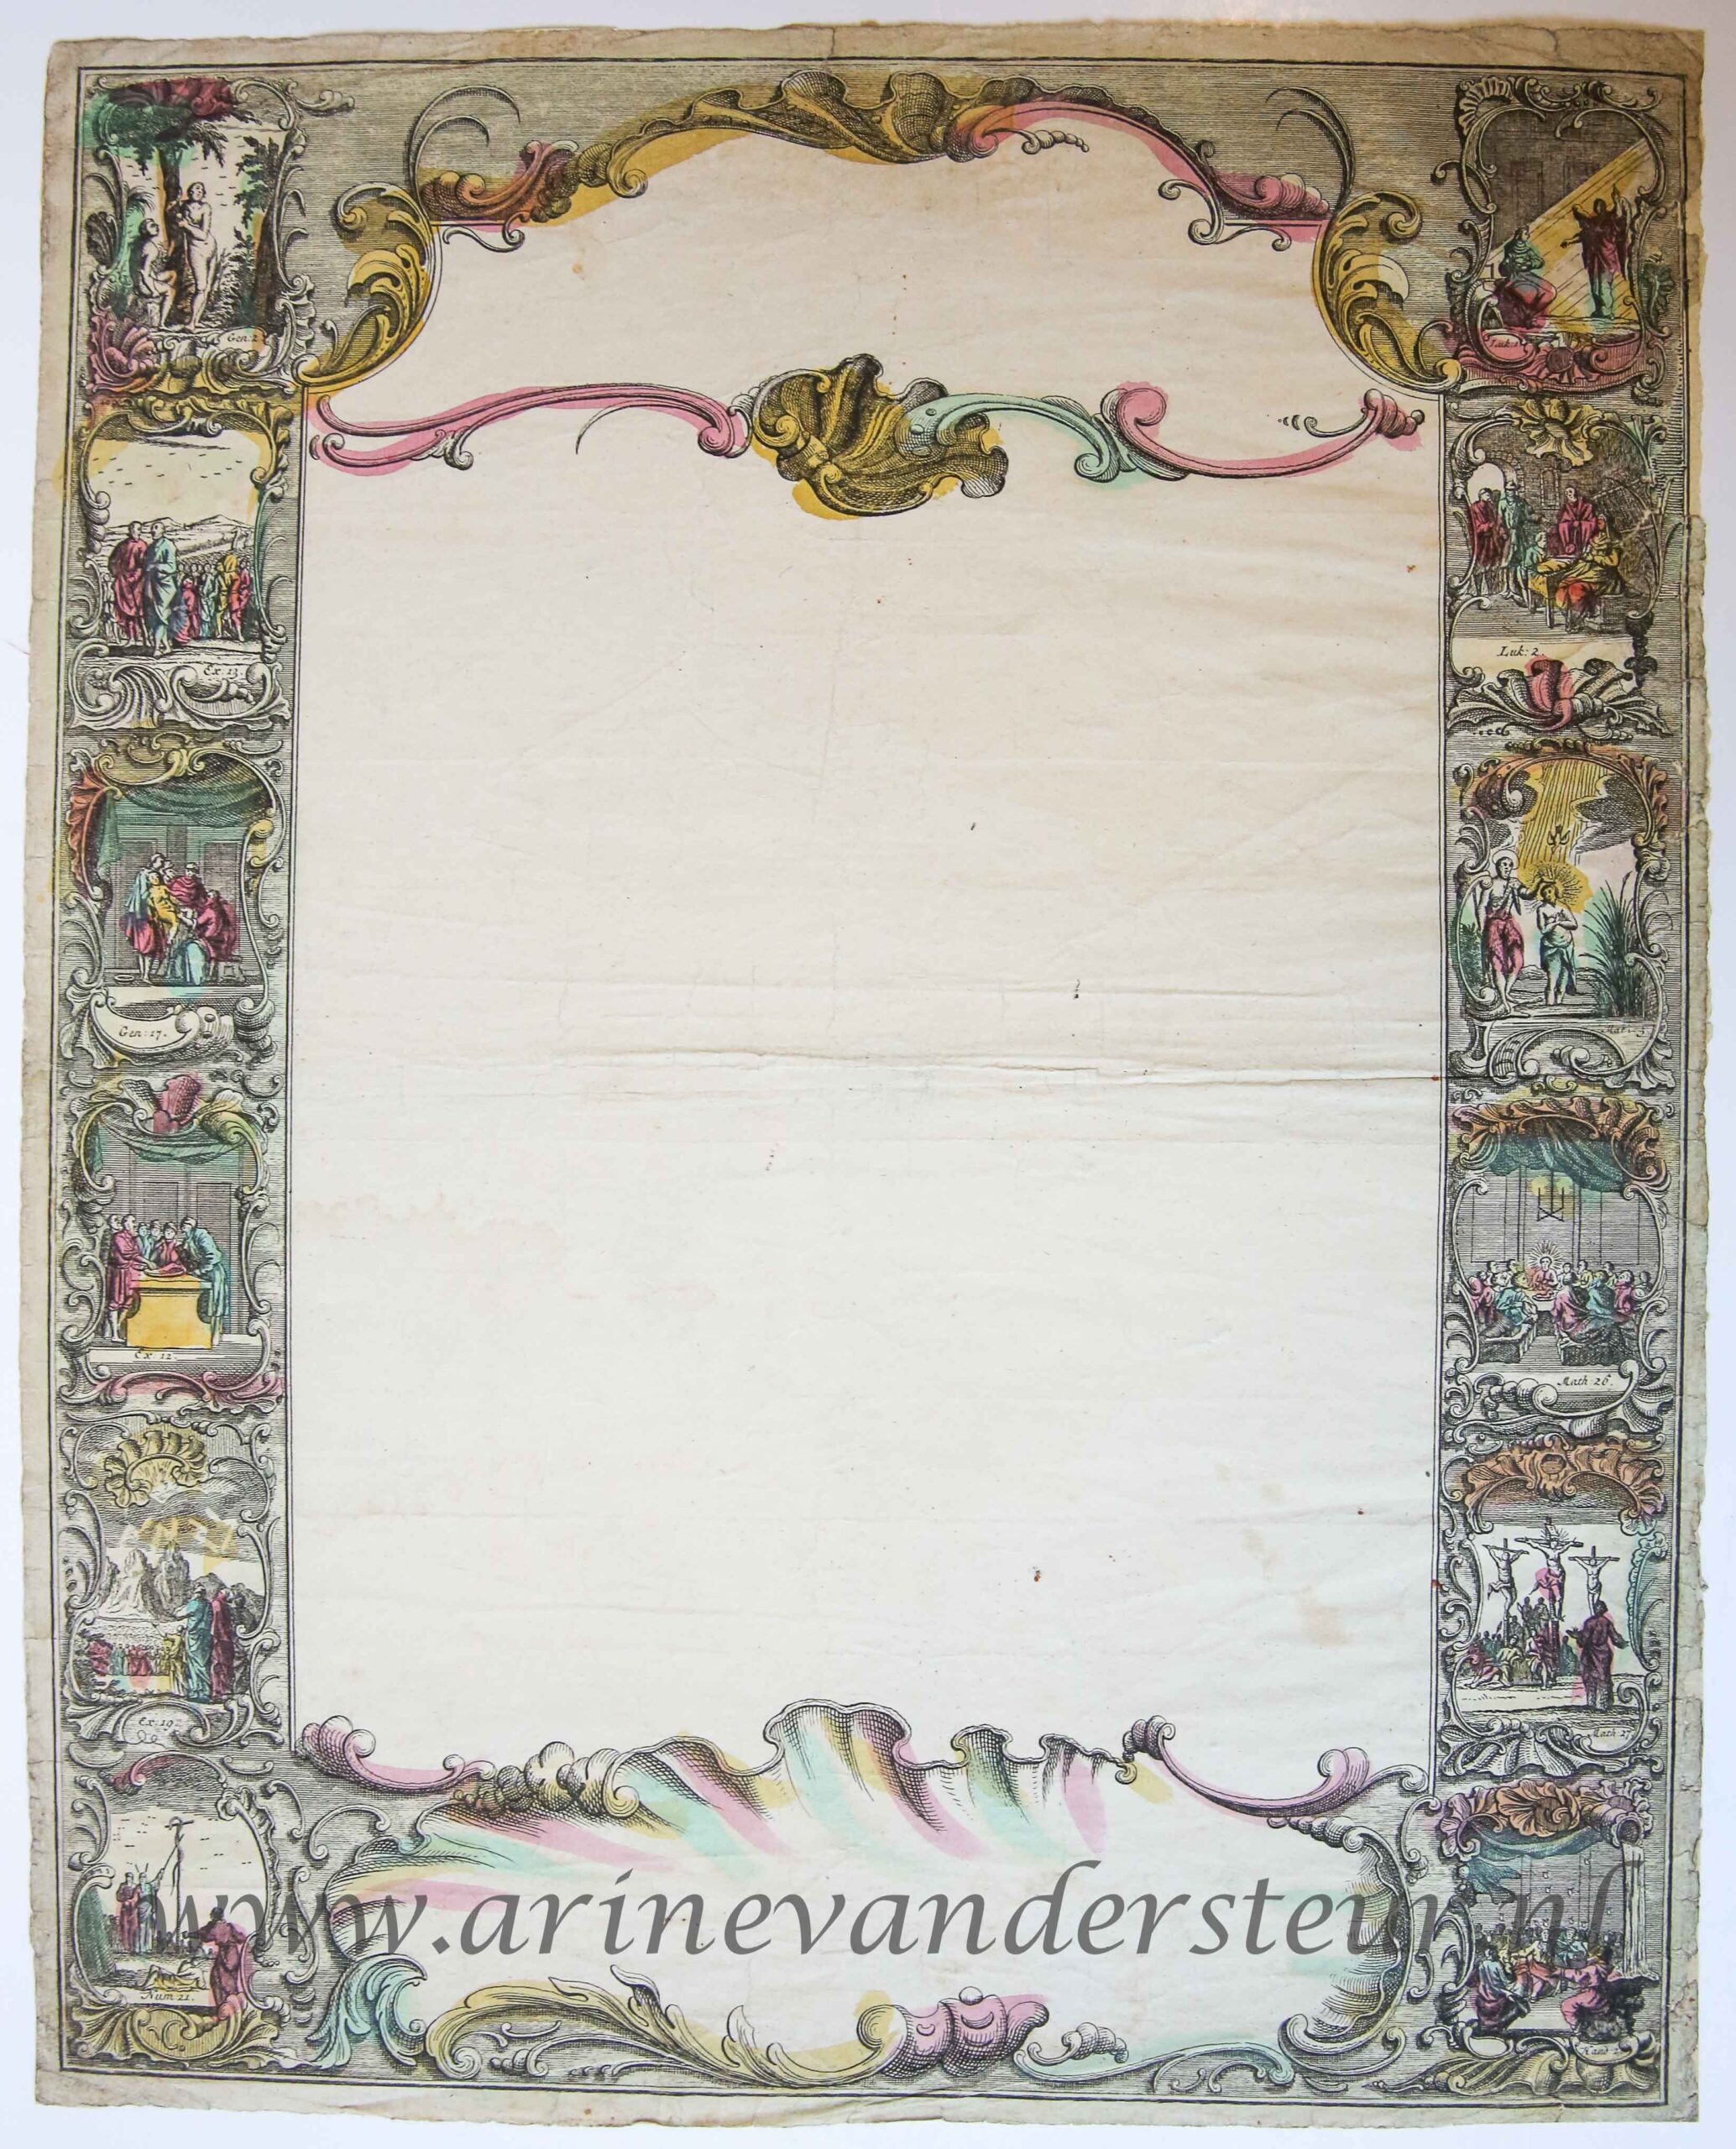 [Nieuwjaarswensch / New Year Wishes, 1790] Blank decorative card with scenes from the Old and New Testament, published ca. 1750-1790, 1 p.